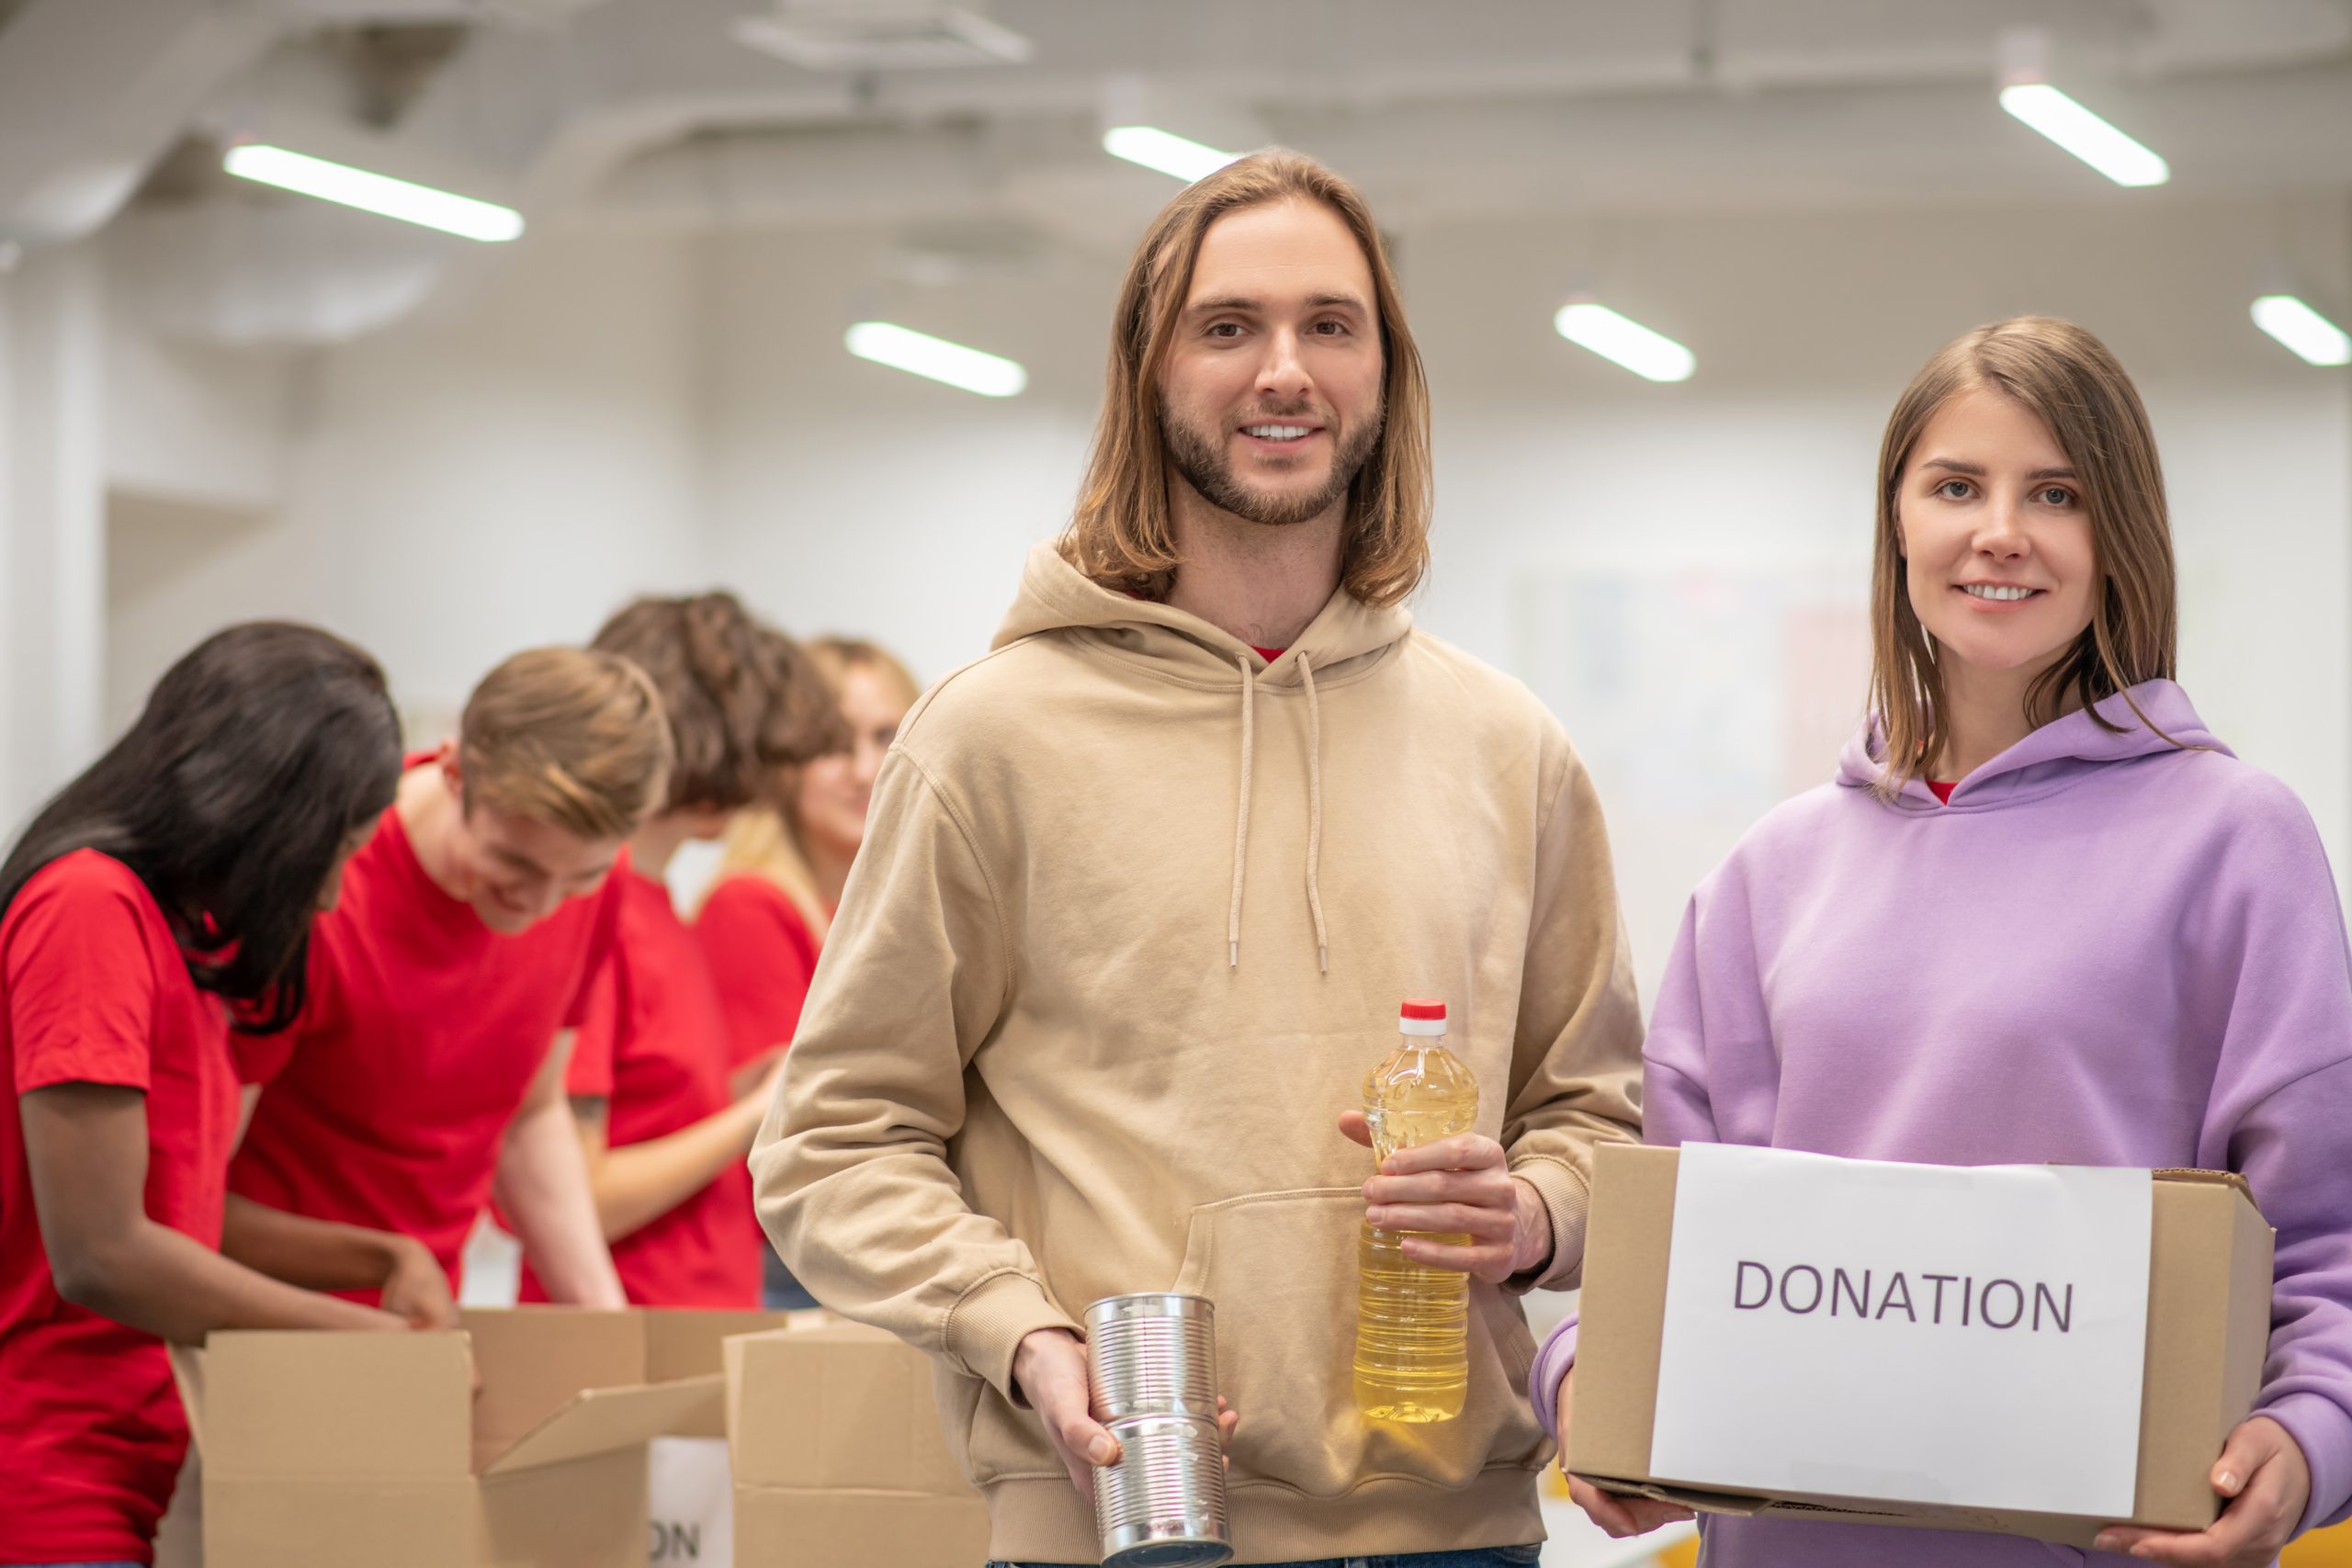 Charity volunteers collecting donations together.